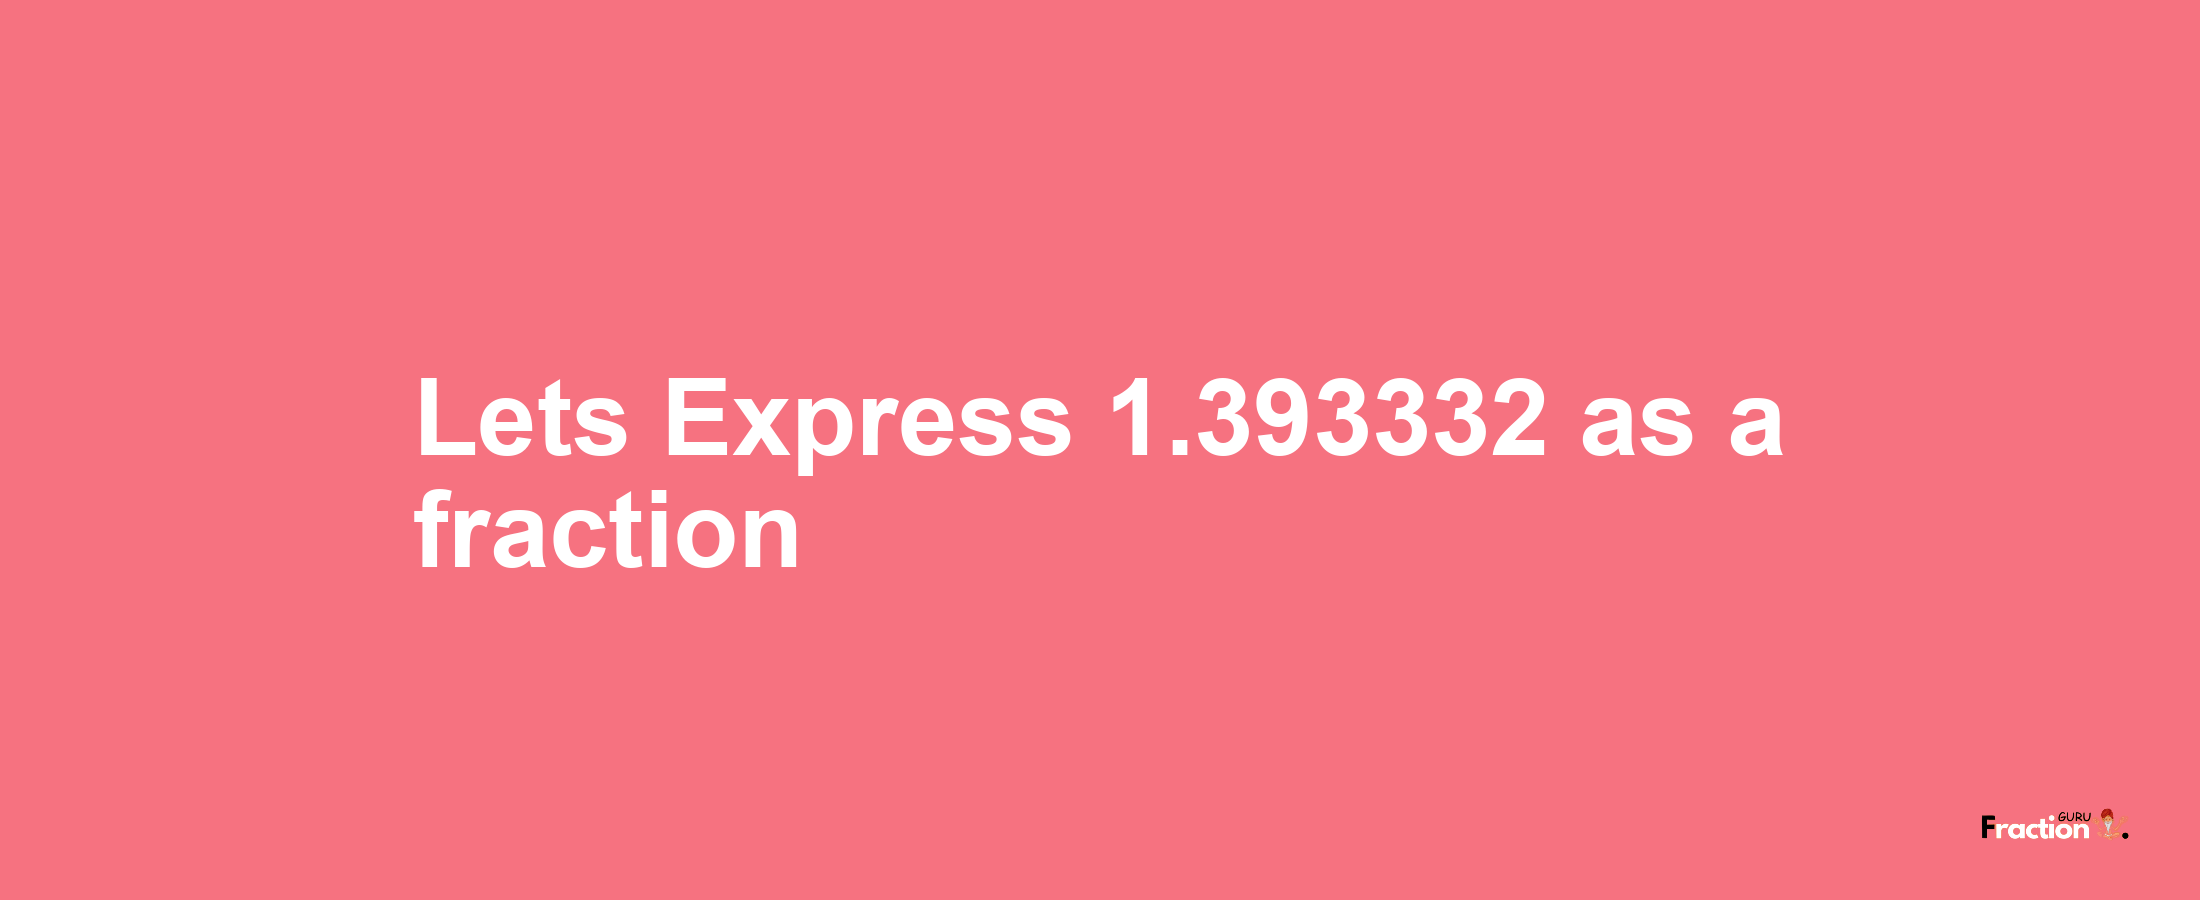 Lets Express 1.393332 as afraction